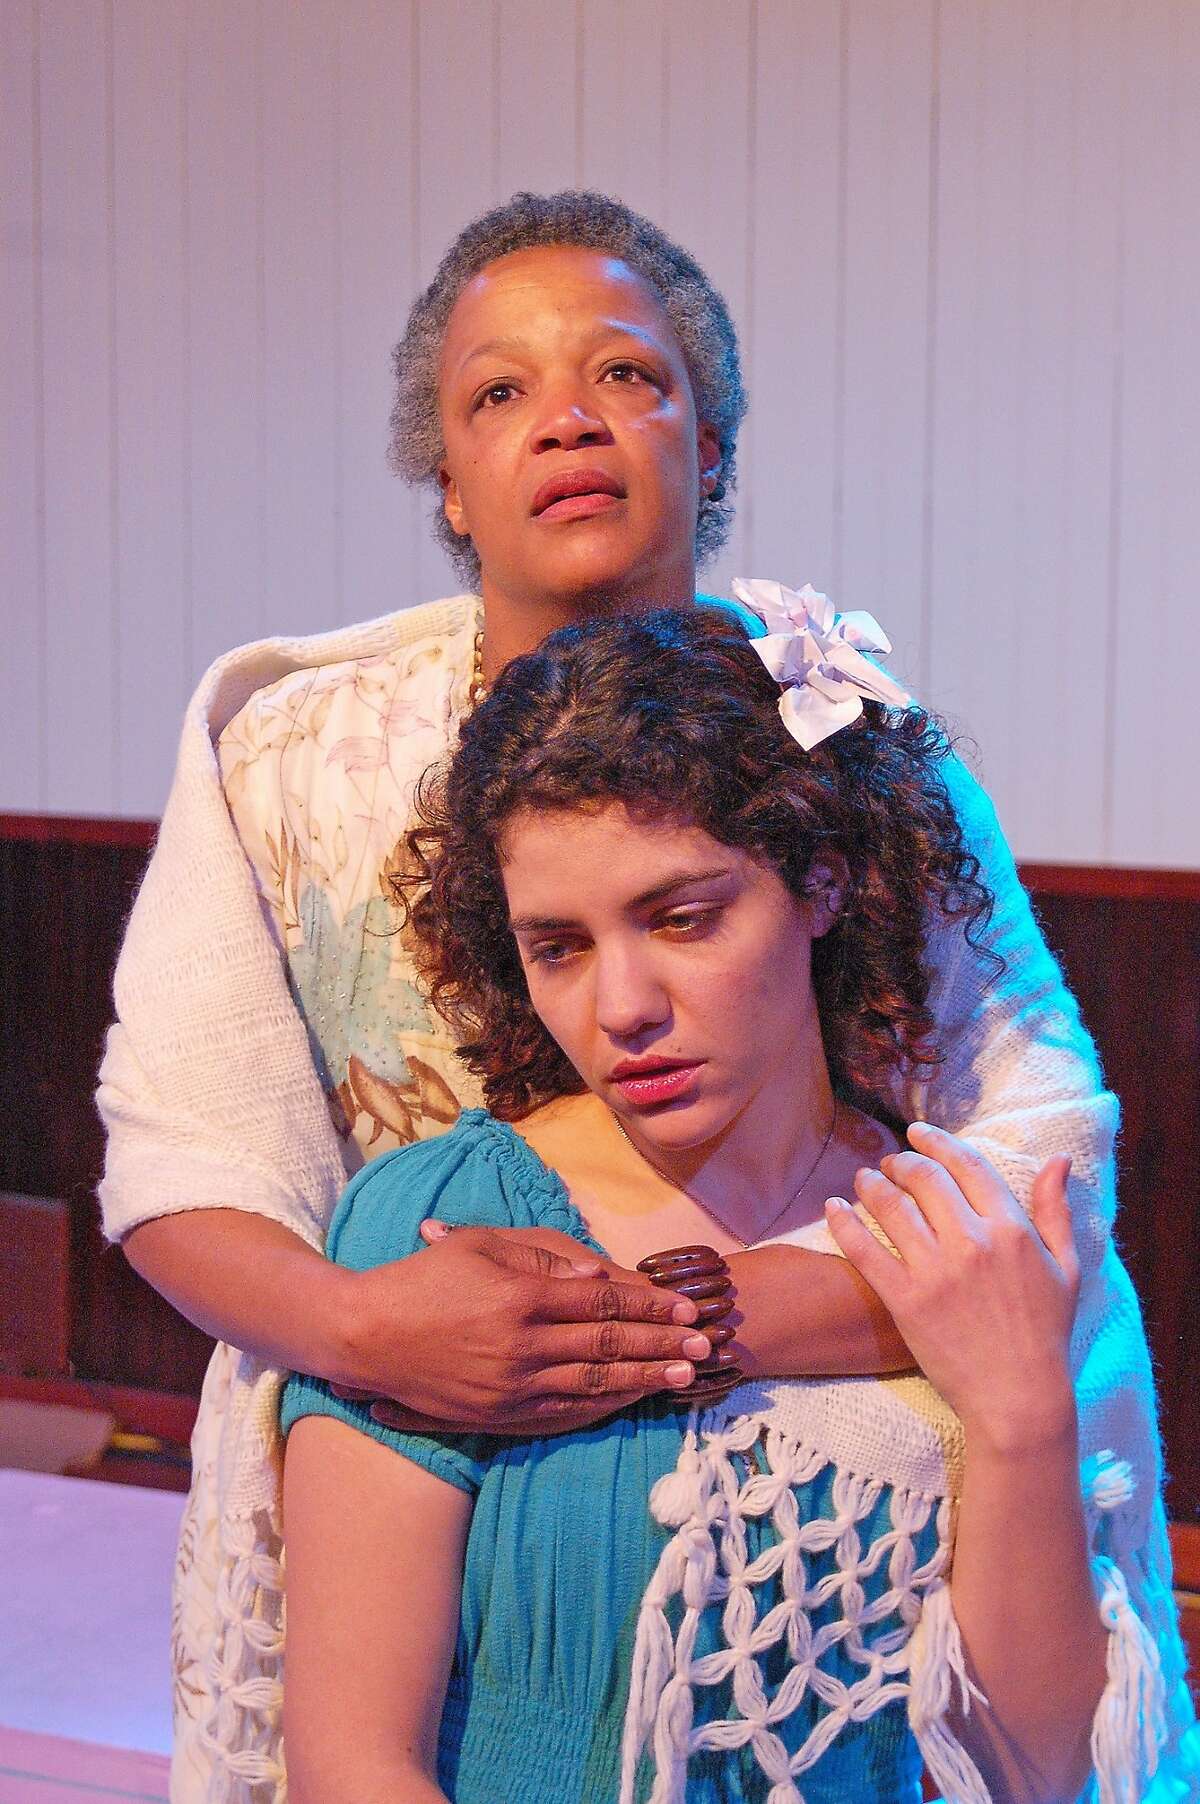 Senhora Costa (Cathleen Riddley, rear) comforts daughter Helena (Carla Pauli) on the eve of her sister's wedding in Alter Theater's "The River Bride"